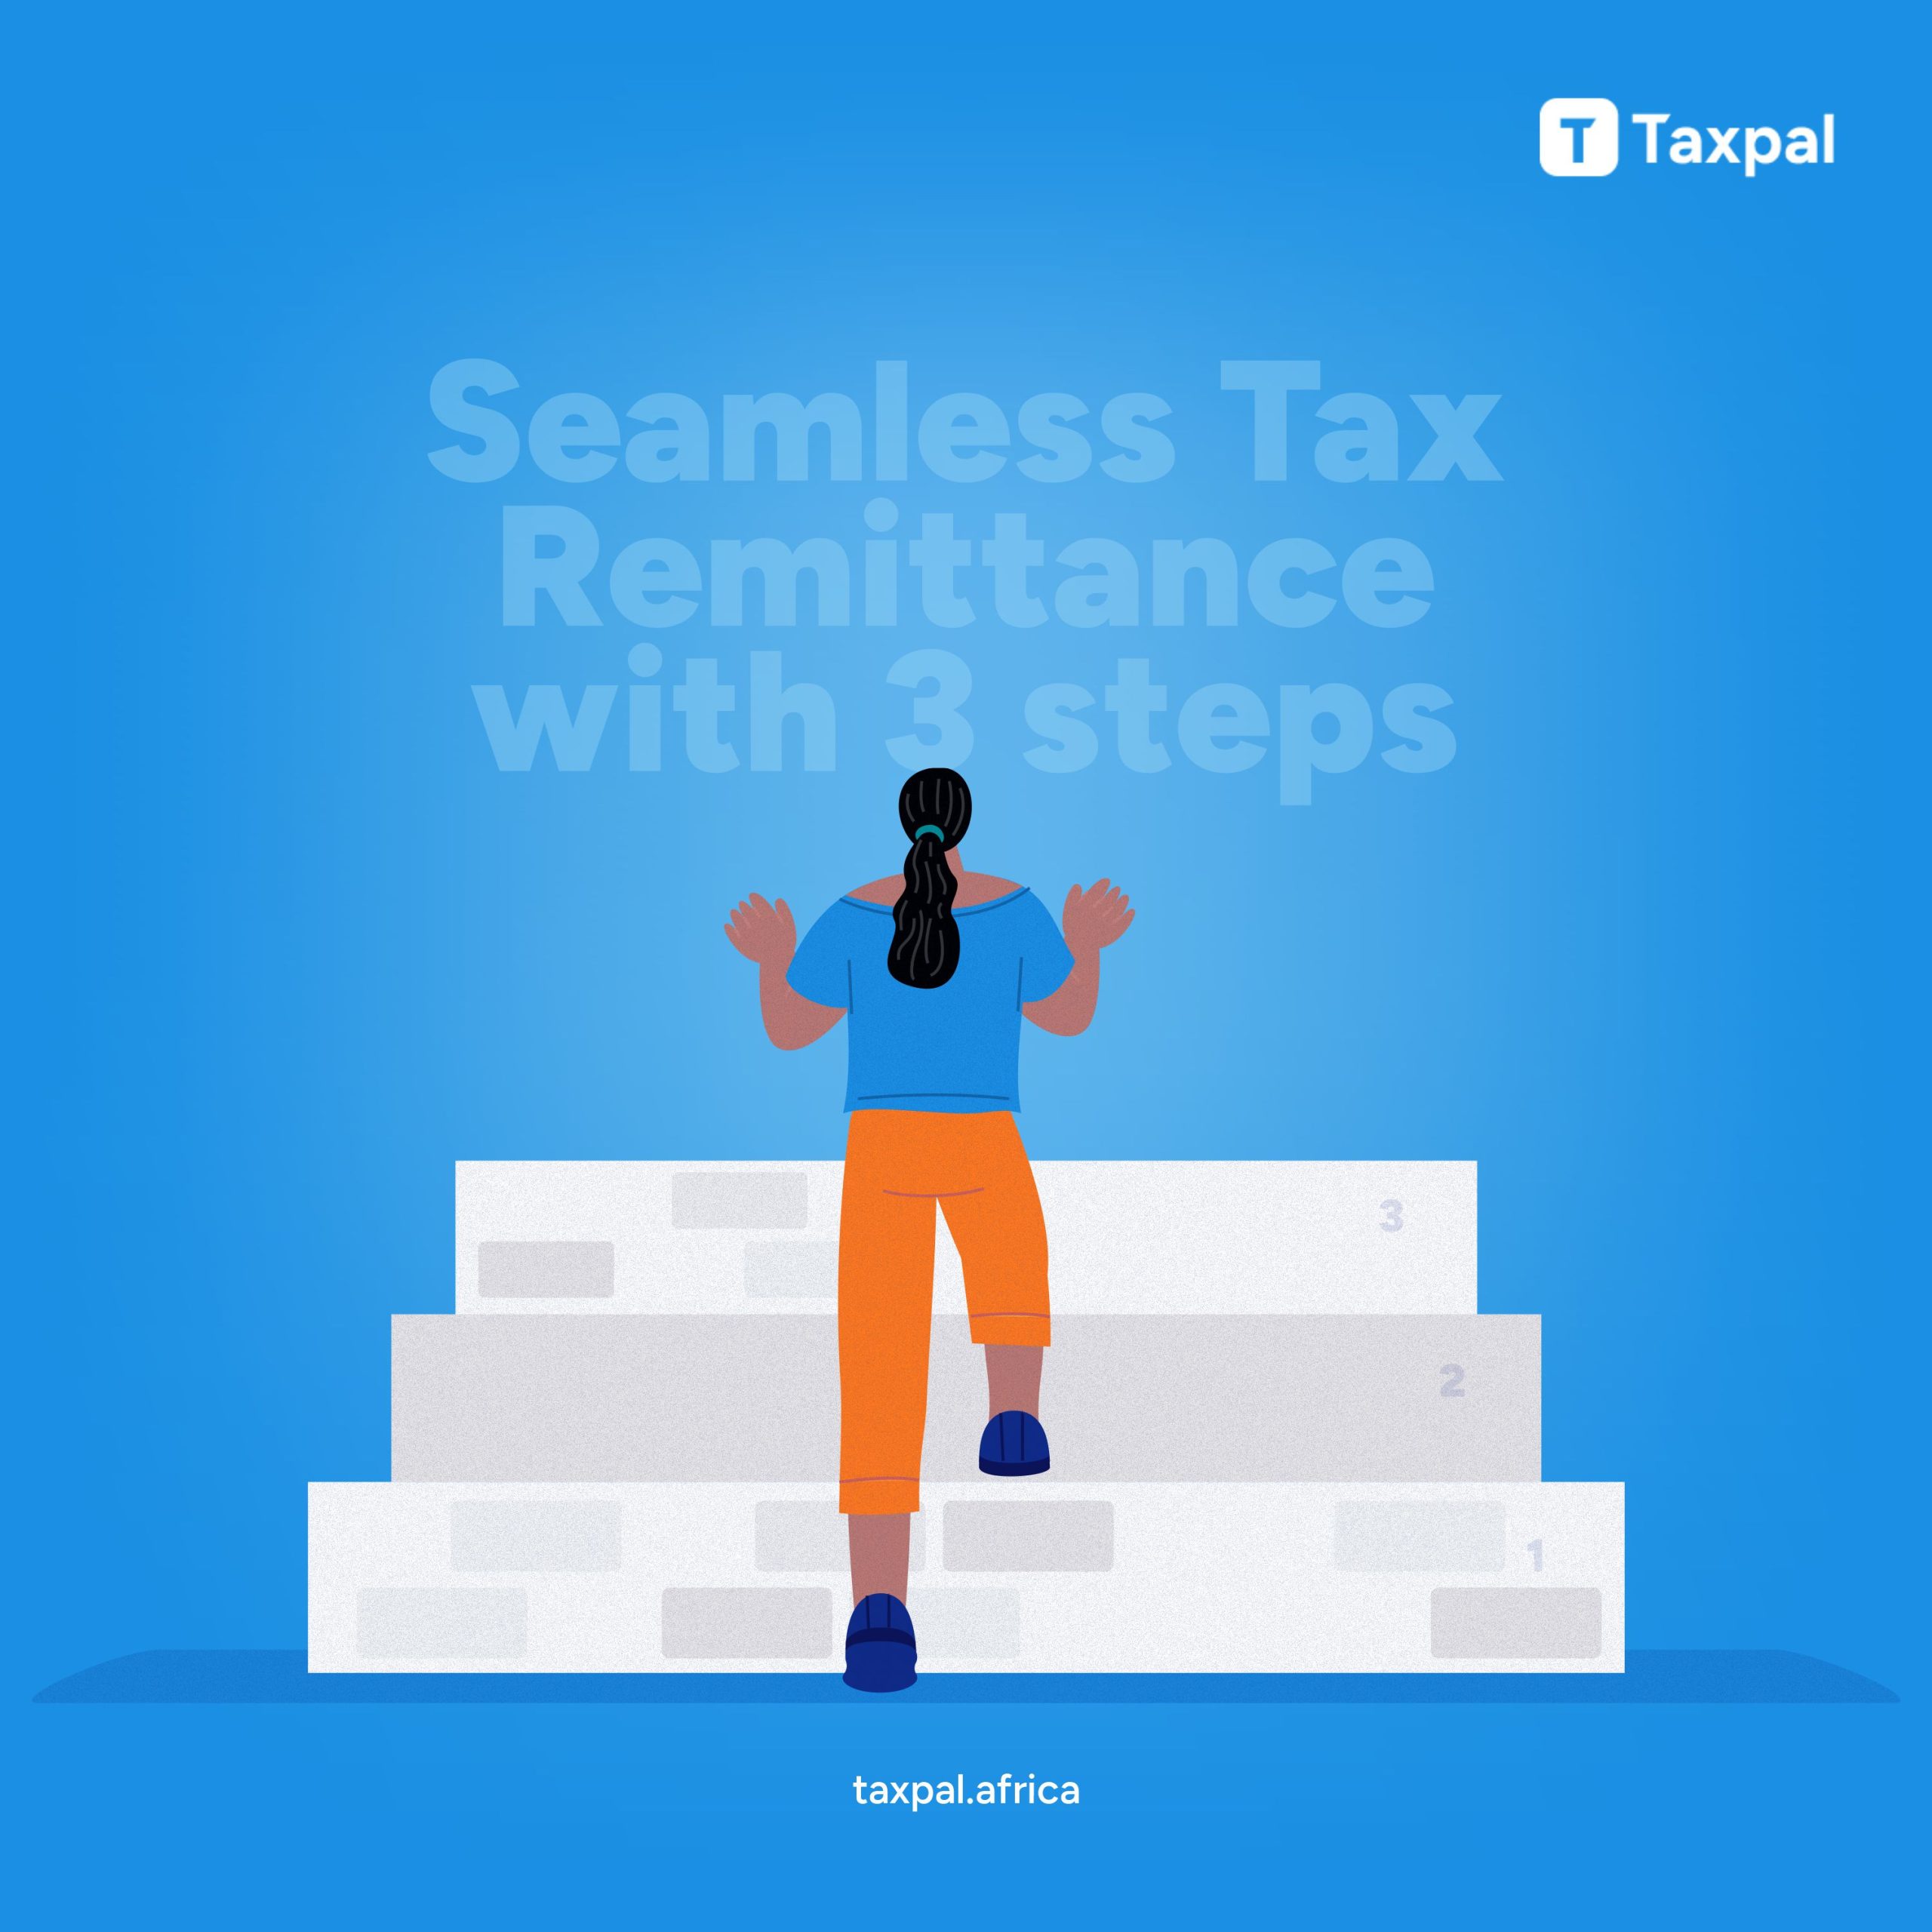 Paying Company Taxes with TaxPal: A guide.